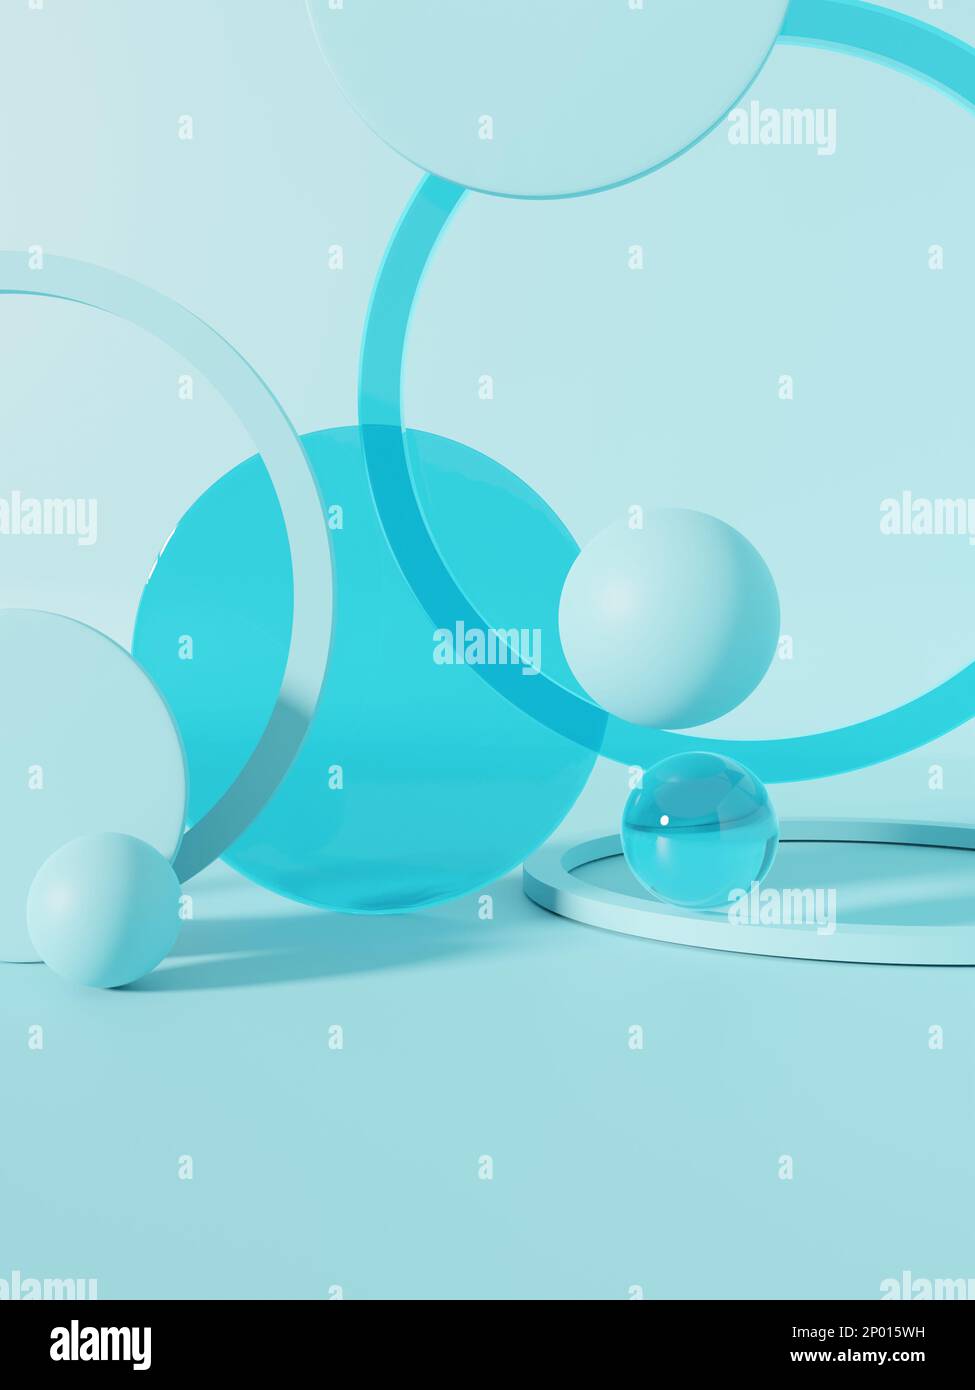 3D Rendering Studio Shot Product Display Background with Transparent Blue Spheres, Plates and Rings for Beauty or Skincare Products. Stock Photo